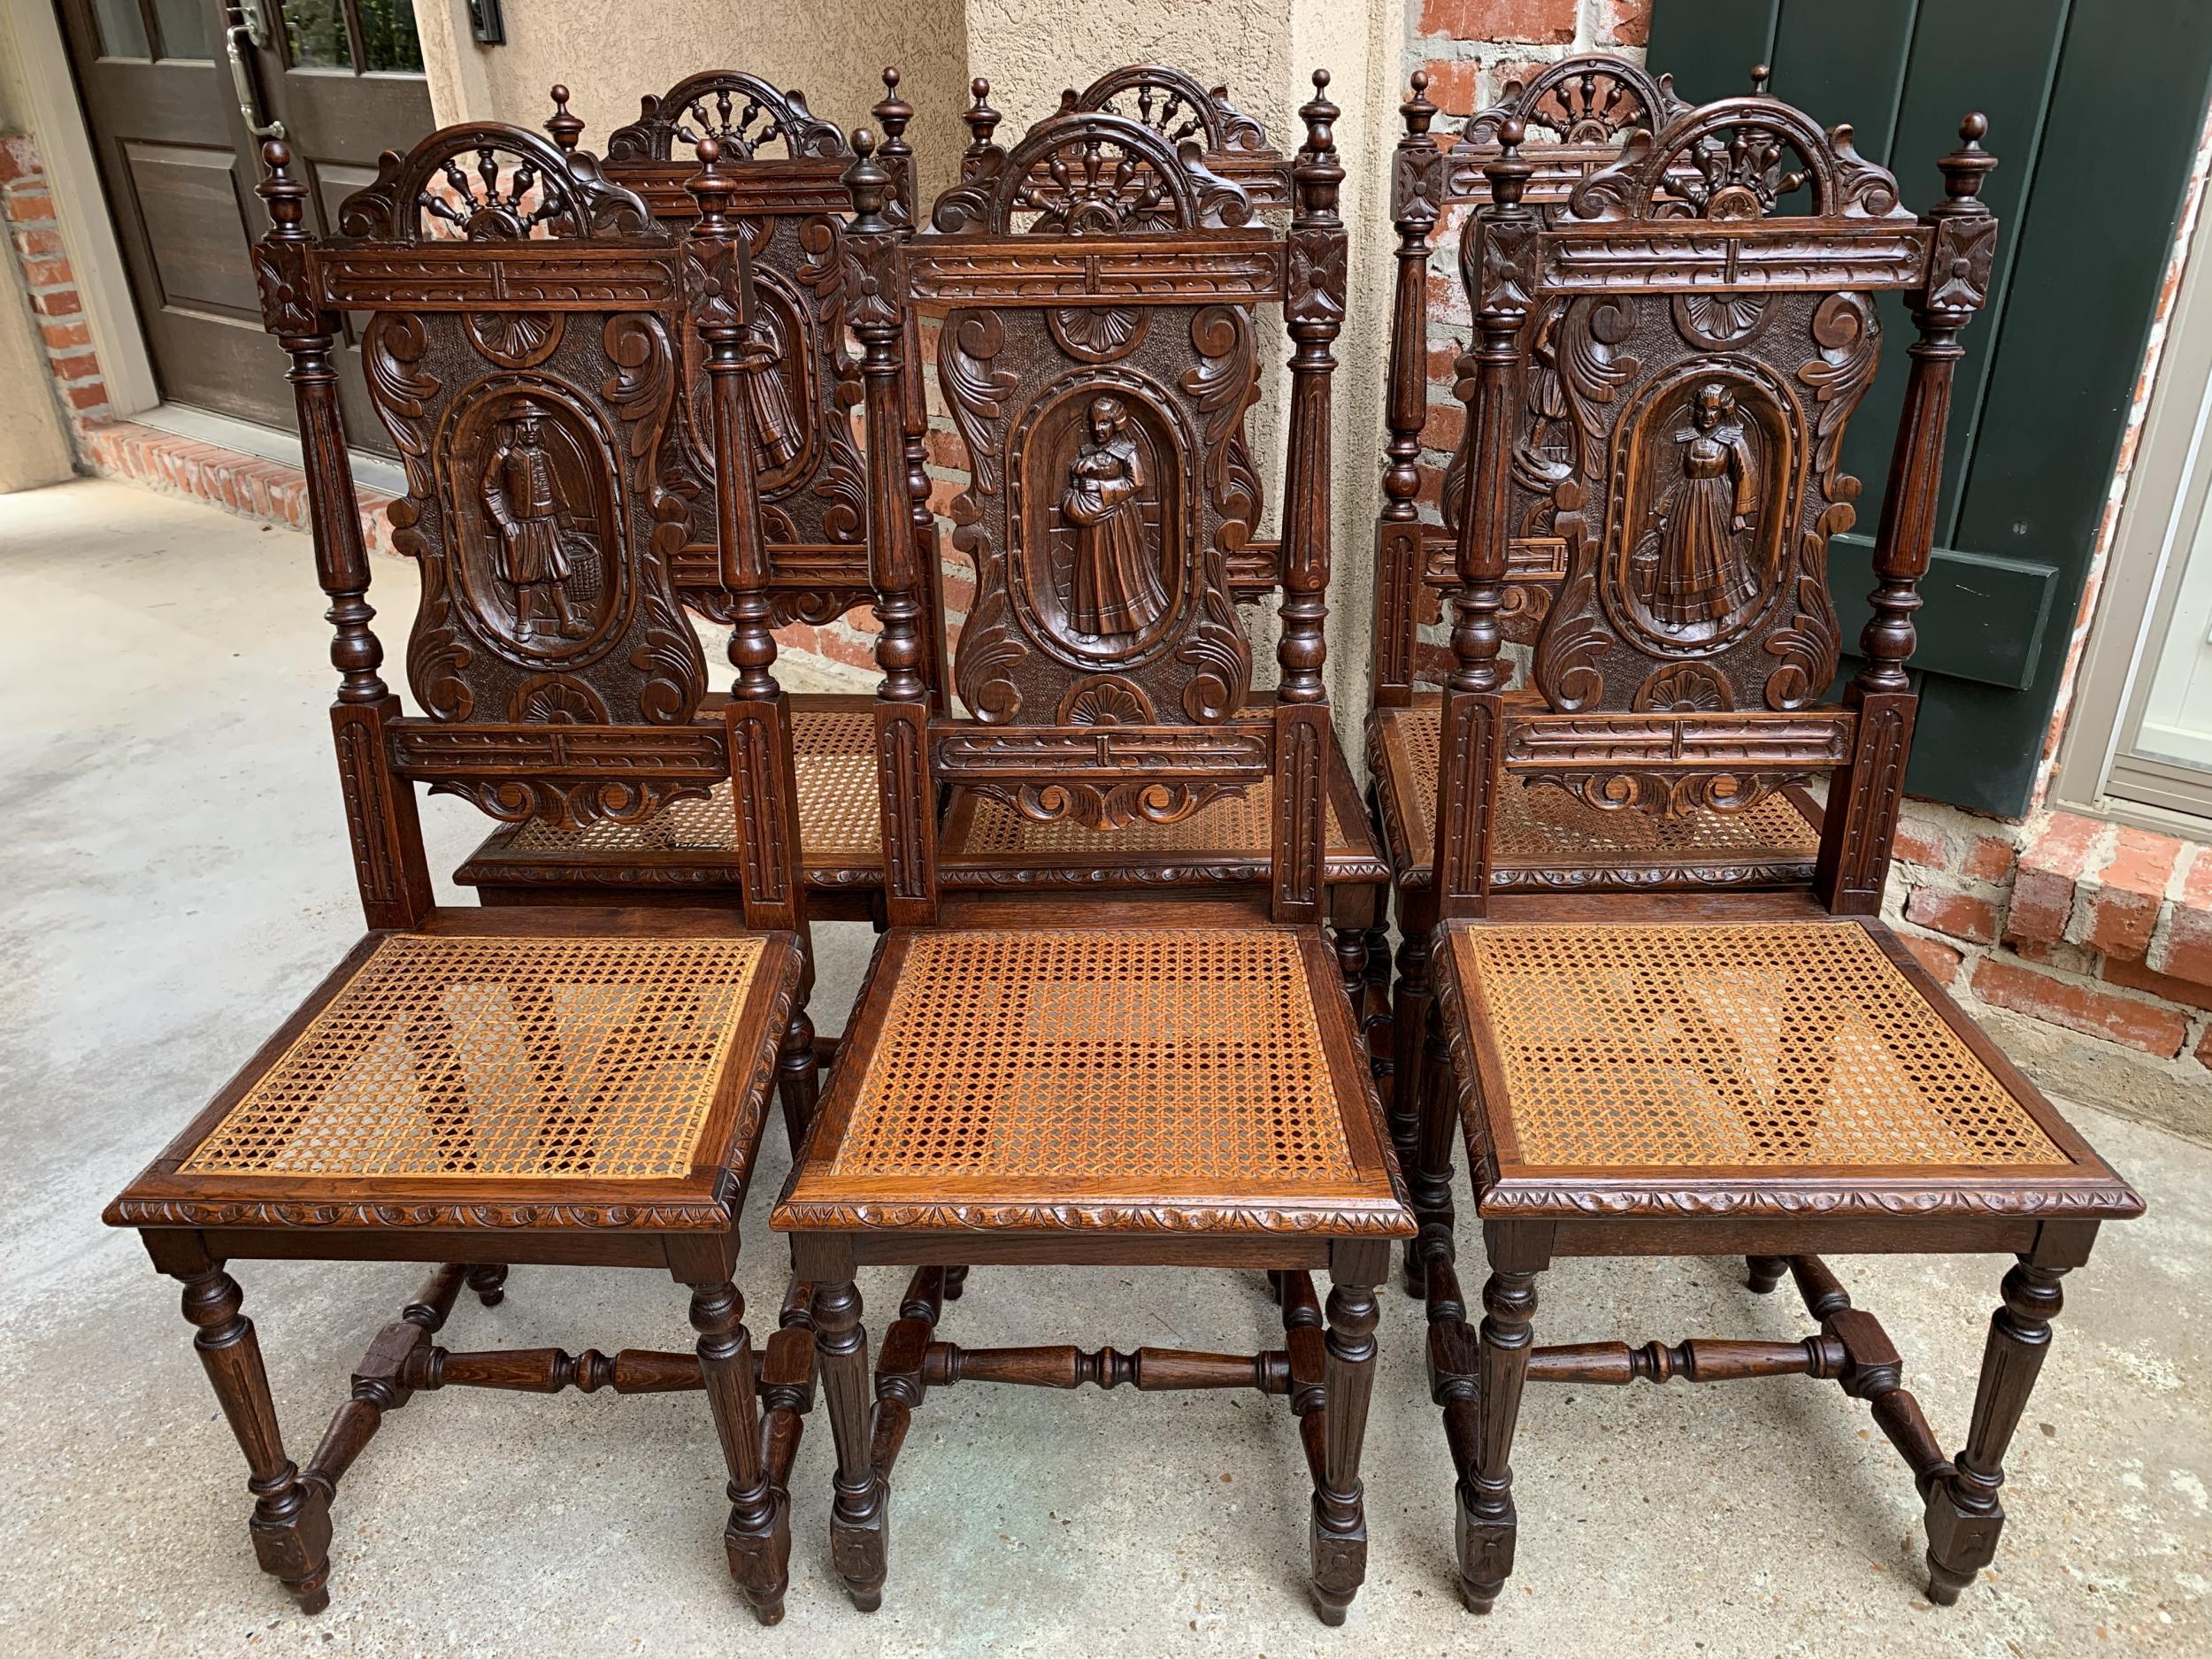 ~Direct from France~
~Lovely set of 6 antique French carved oak dining chairs~
~Ornate carved design on the crest with the ubiquitous Breton “ships wheel” trim on the rail~
~The highlight are the carved figural characters on each chair, three are